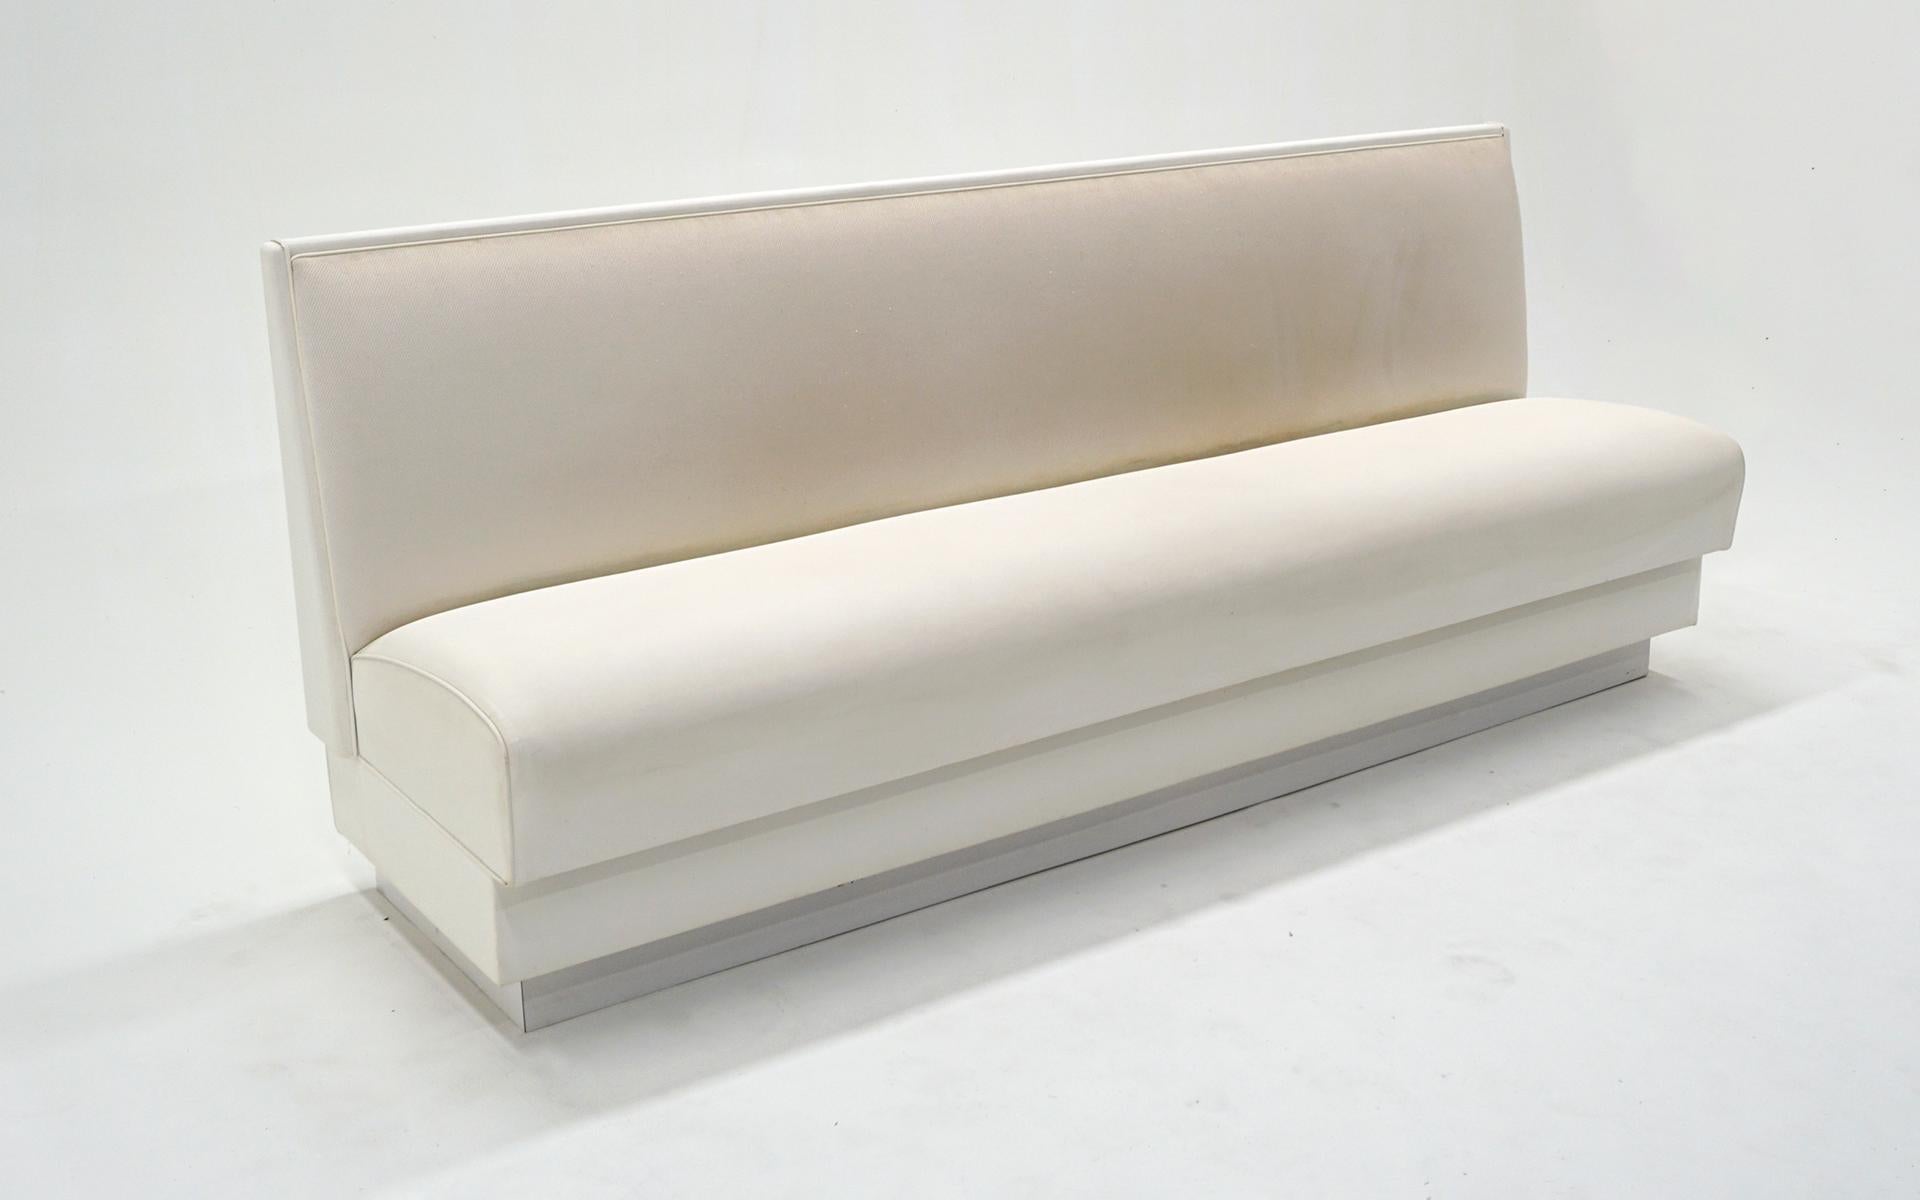 banquette seating dimensions inches